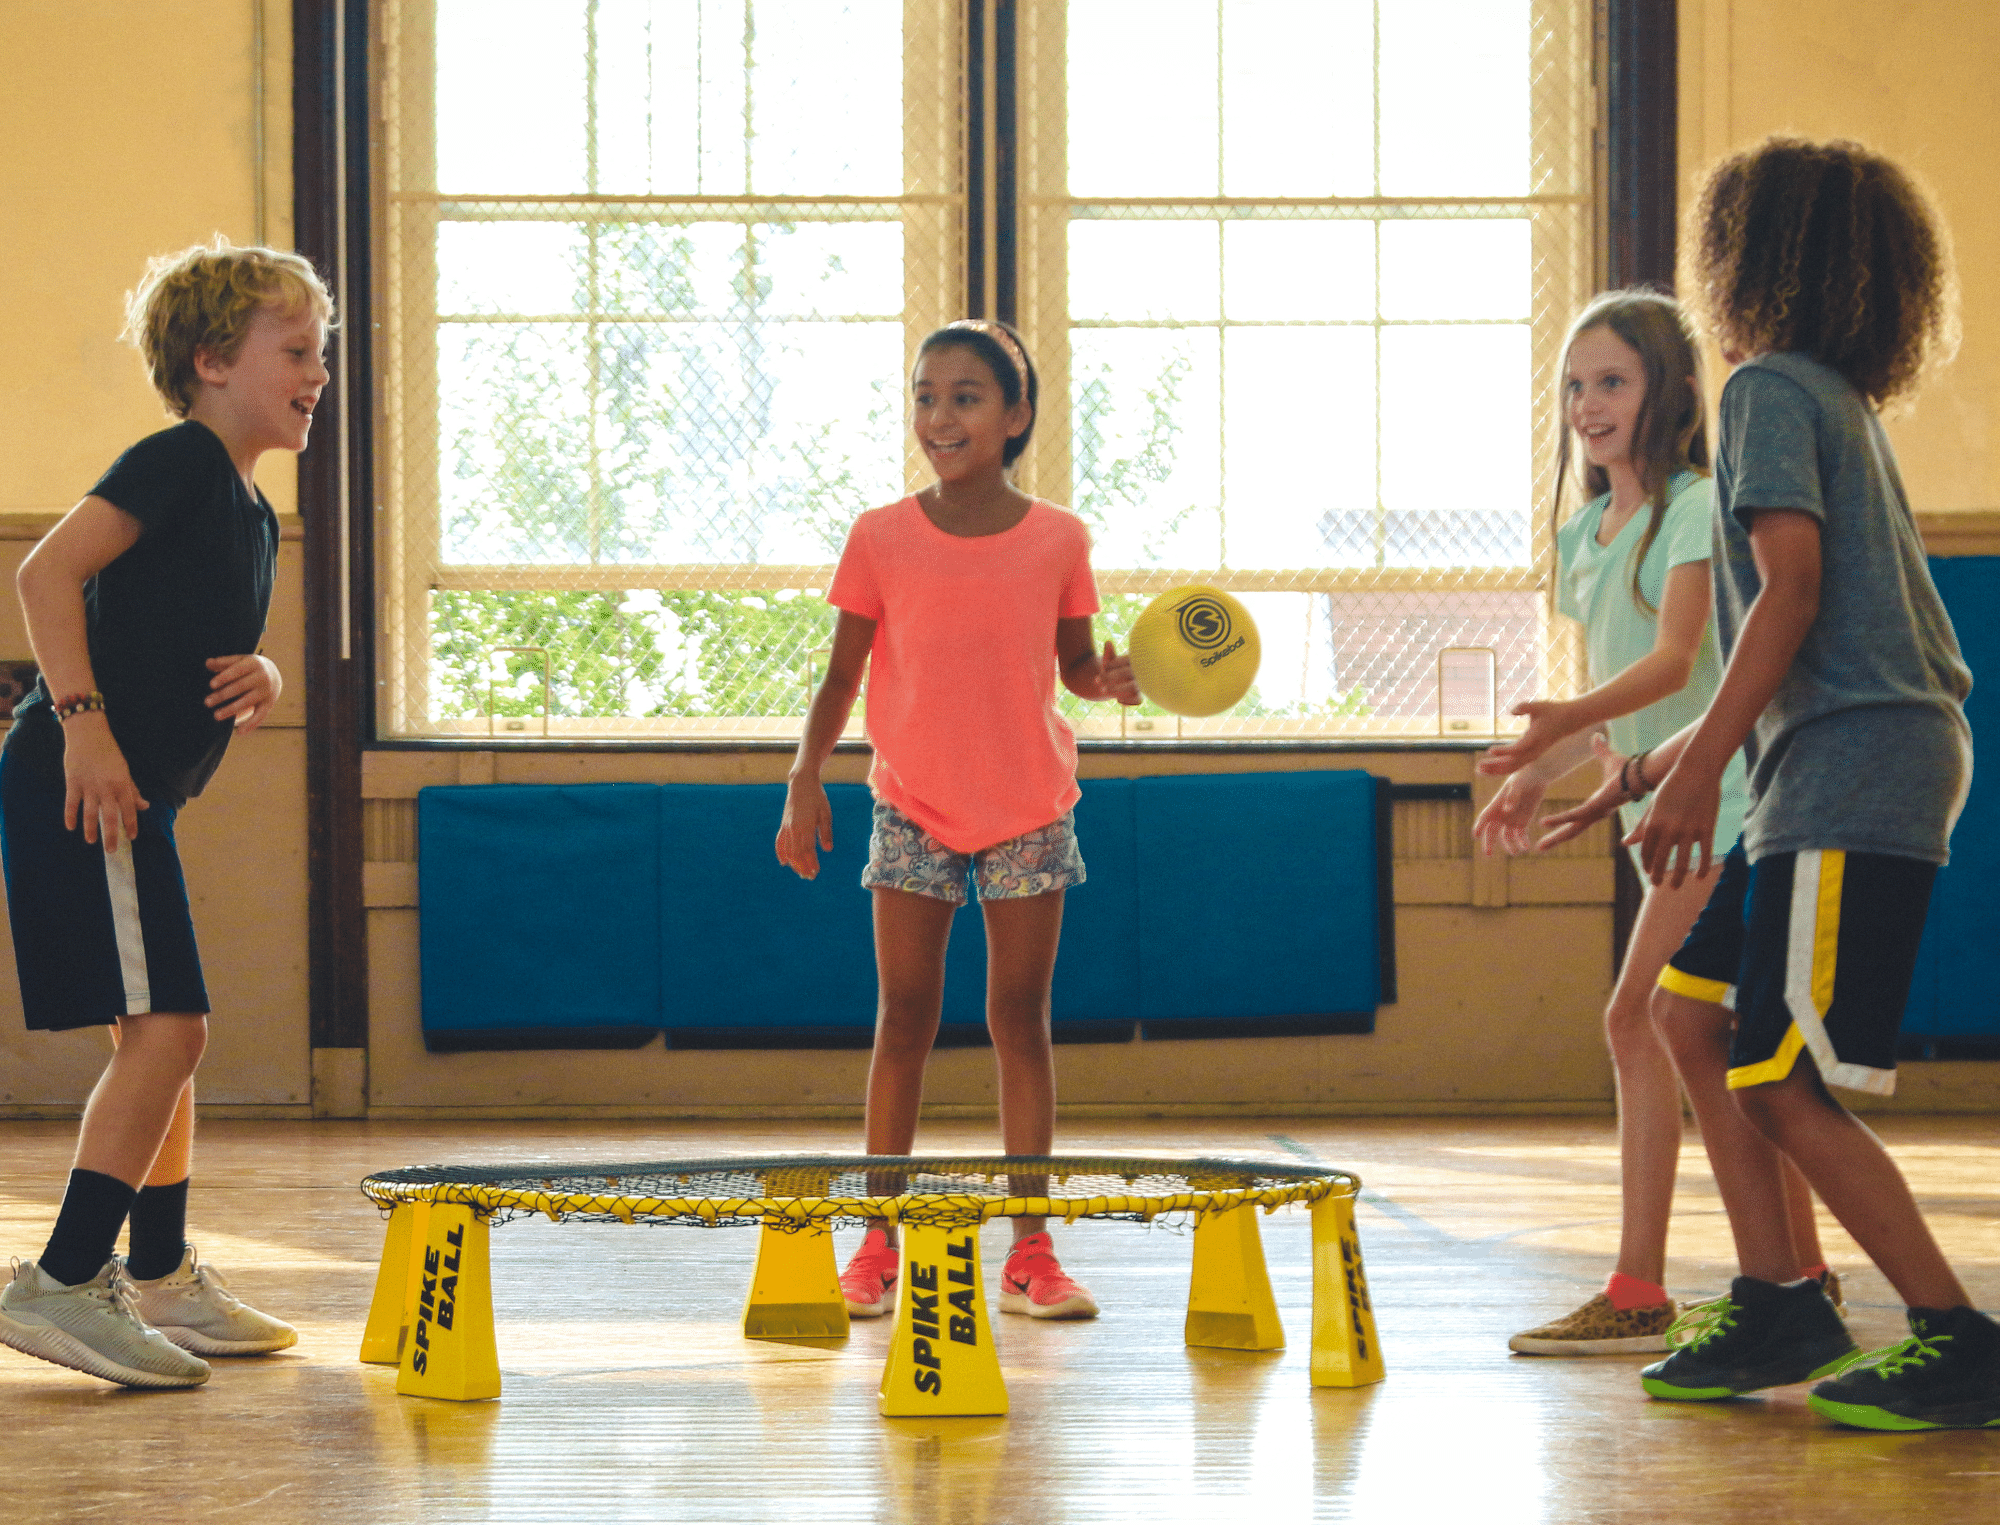 Four kids playing spike ball in a gym. Here's how to address kids when they say that's racist!